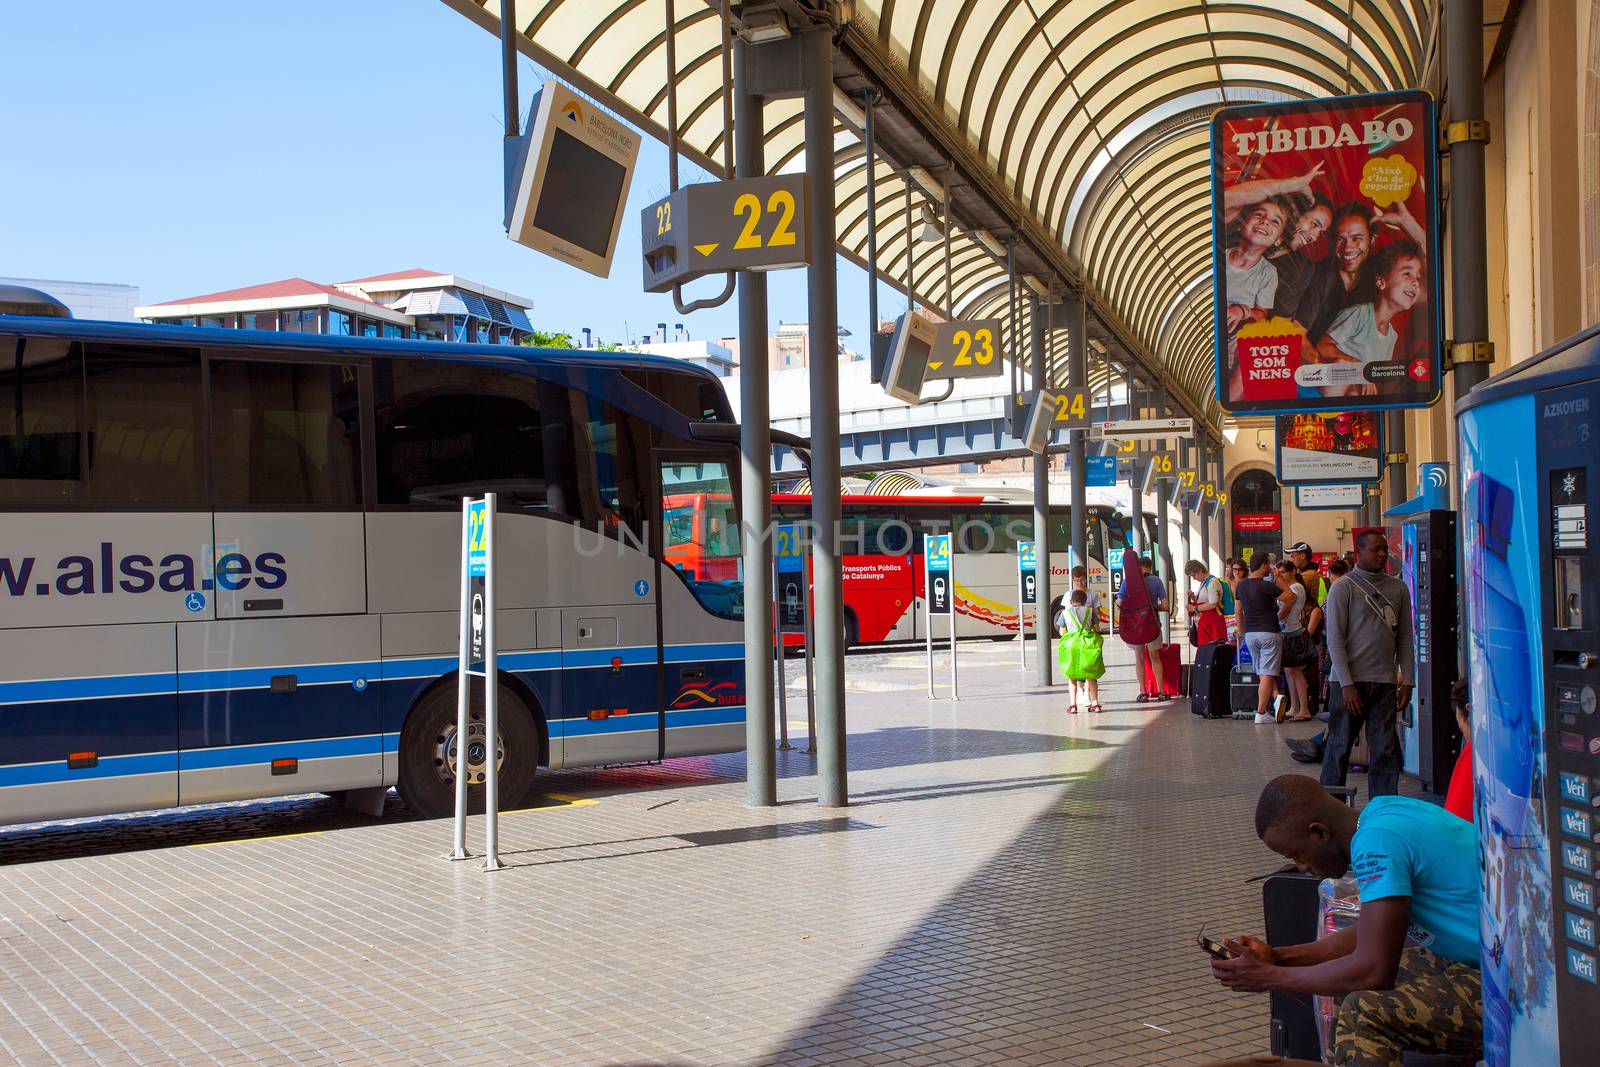 Spain, Catalonia, JUNE 14, 2013: Barcelona Bus Terminal Estacio Nord, apron with buses and passengers